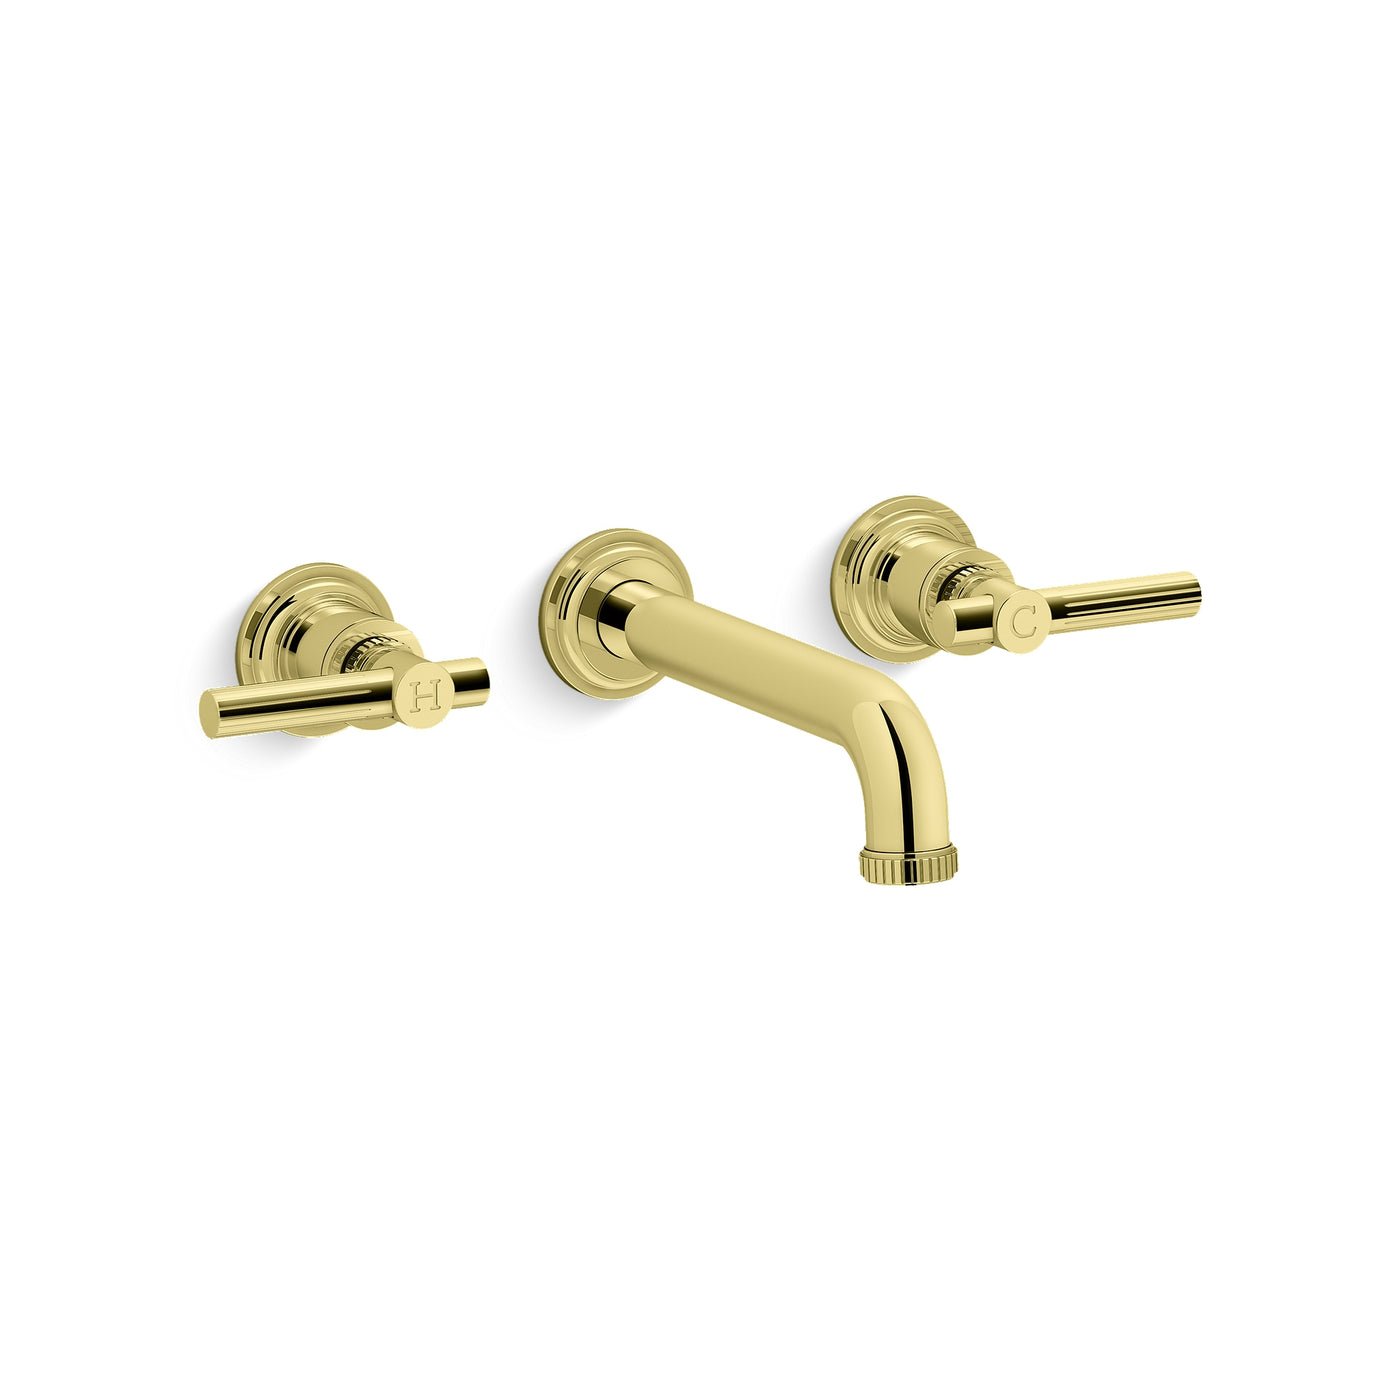 Central Park West™ by Robert A.M. Stern Architects Wall-Mount Sink Faucet, Lever Handles